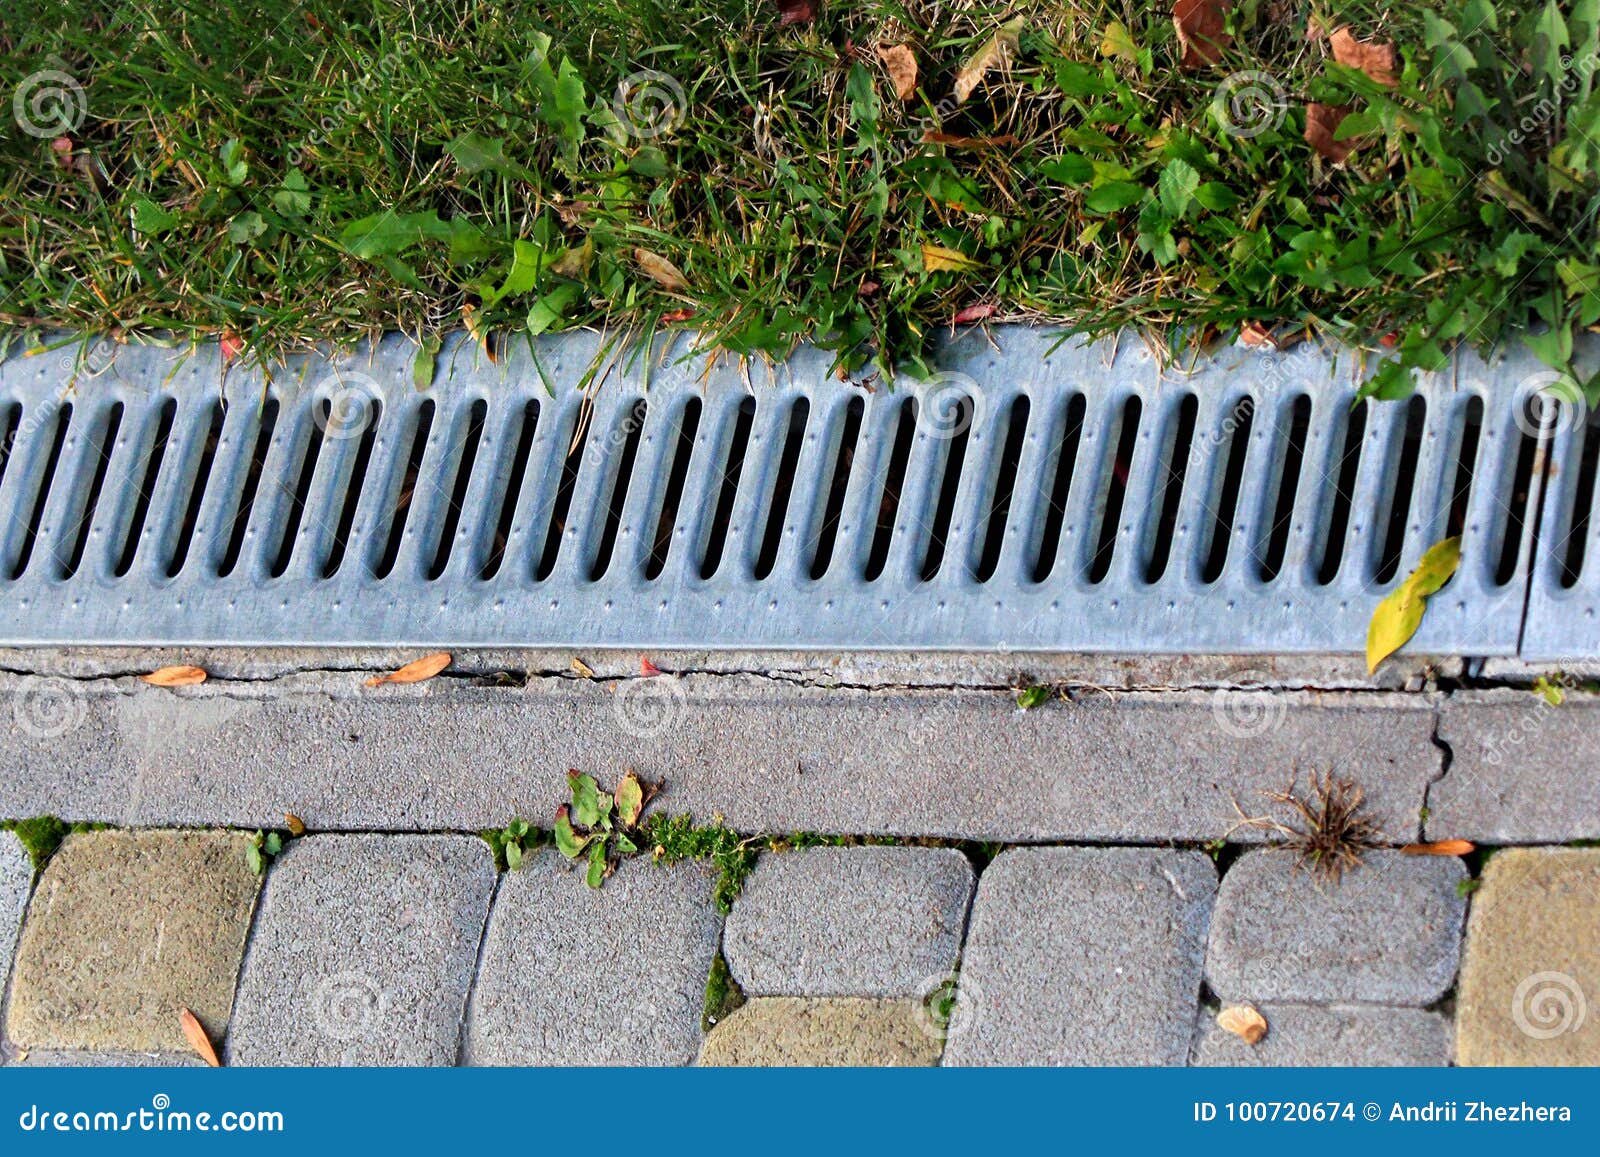 metal grate of rainwater drainage system in a park